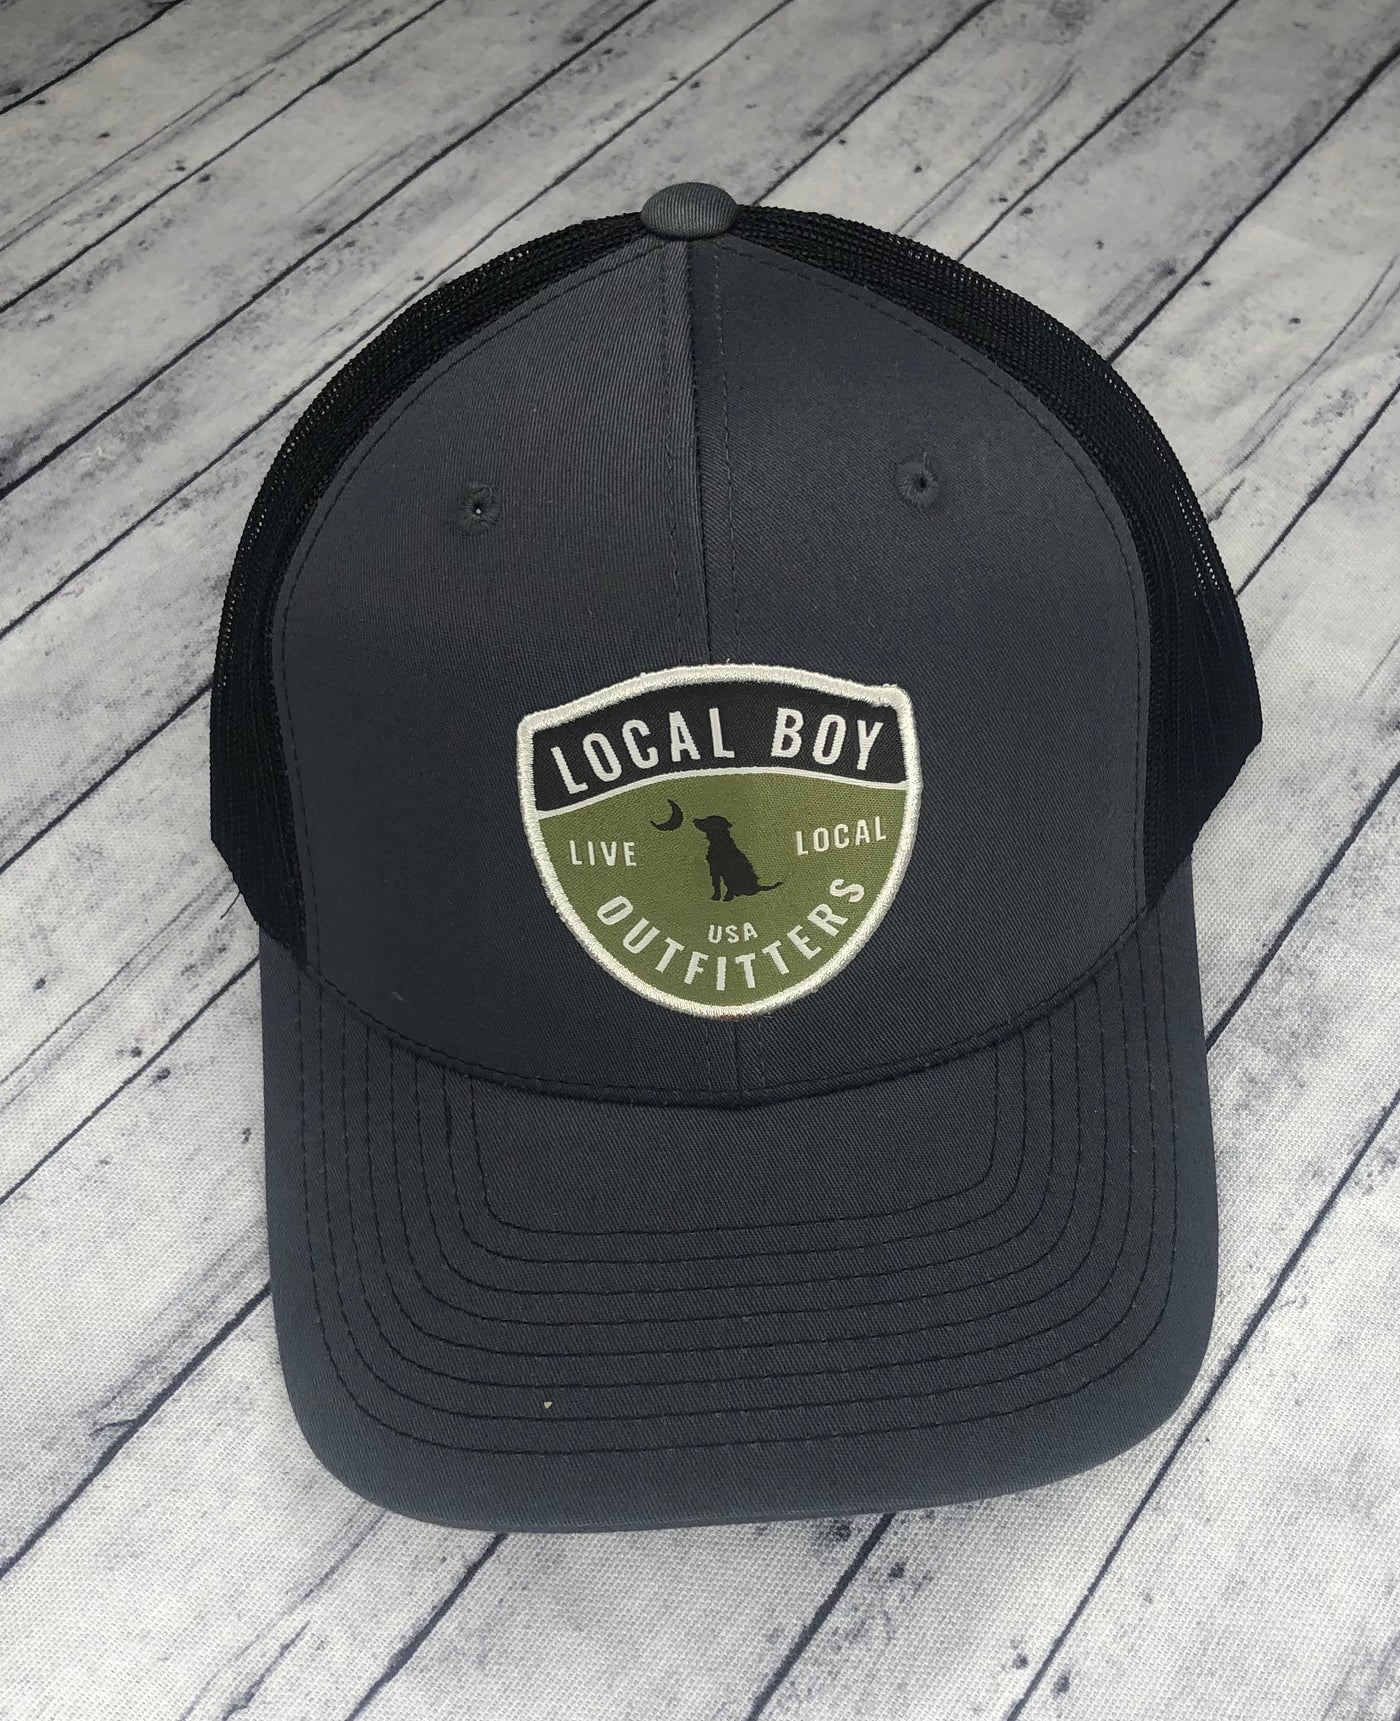 Local Boy Outfitters I-13 Trucker Hat Charcoal/Black